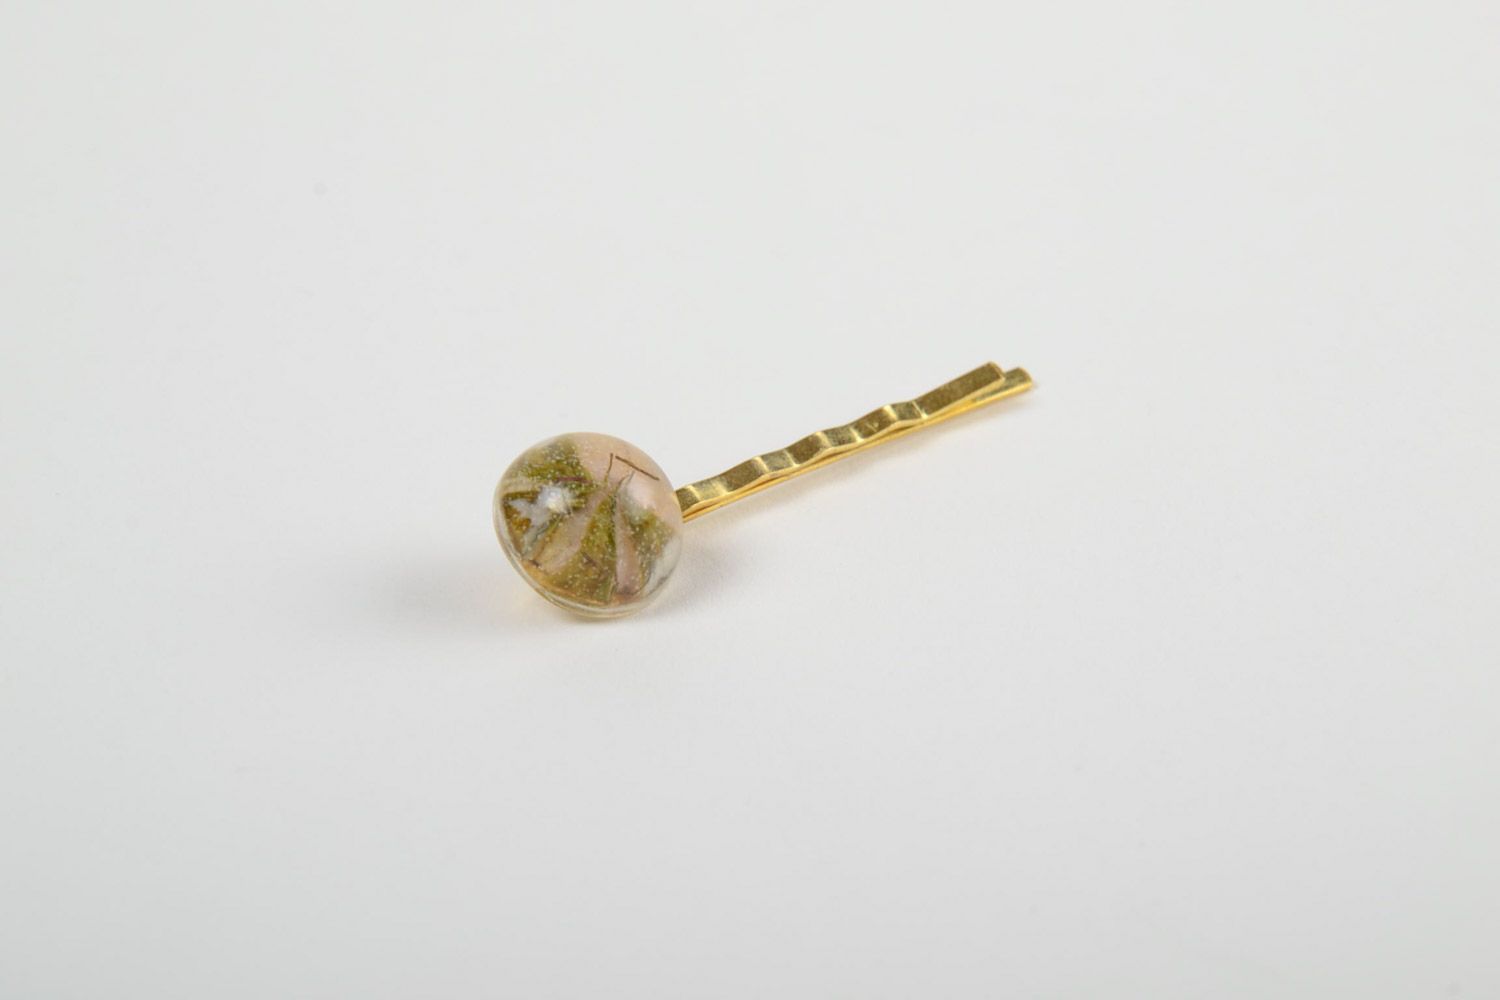 Handmade small hair clip with metal basis and natural plant in epoxy resin photo 4